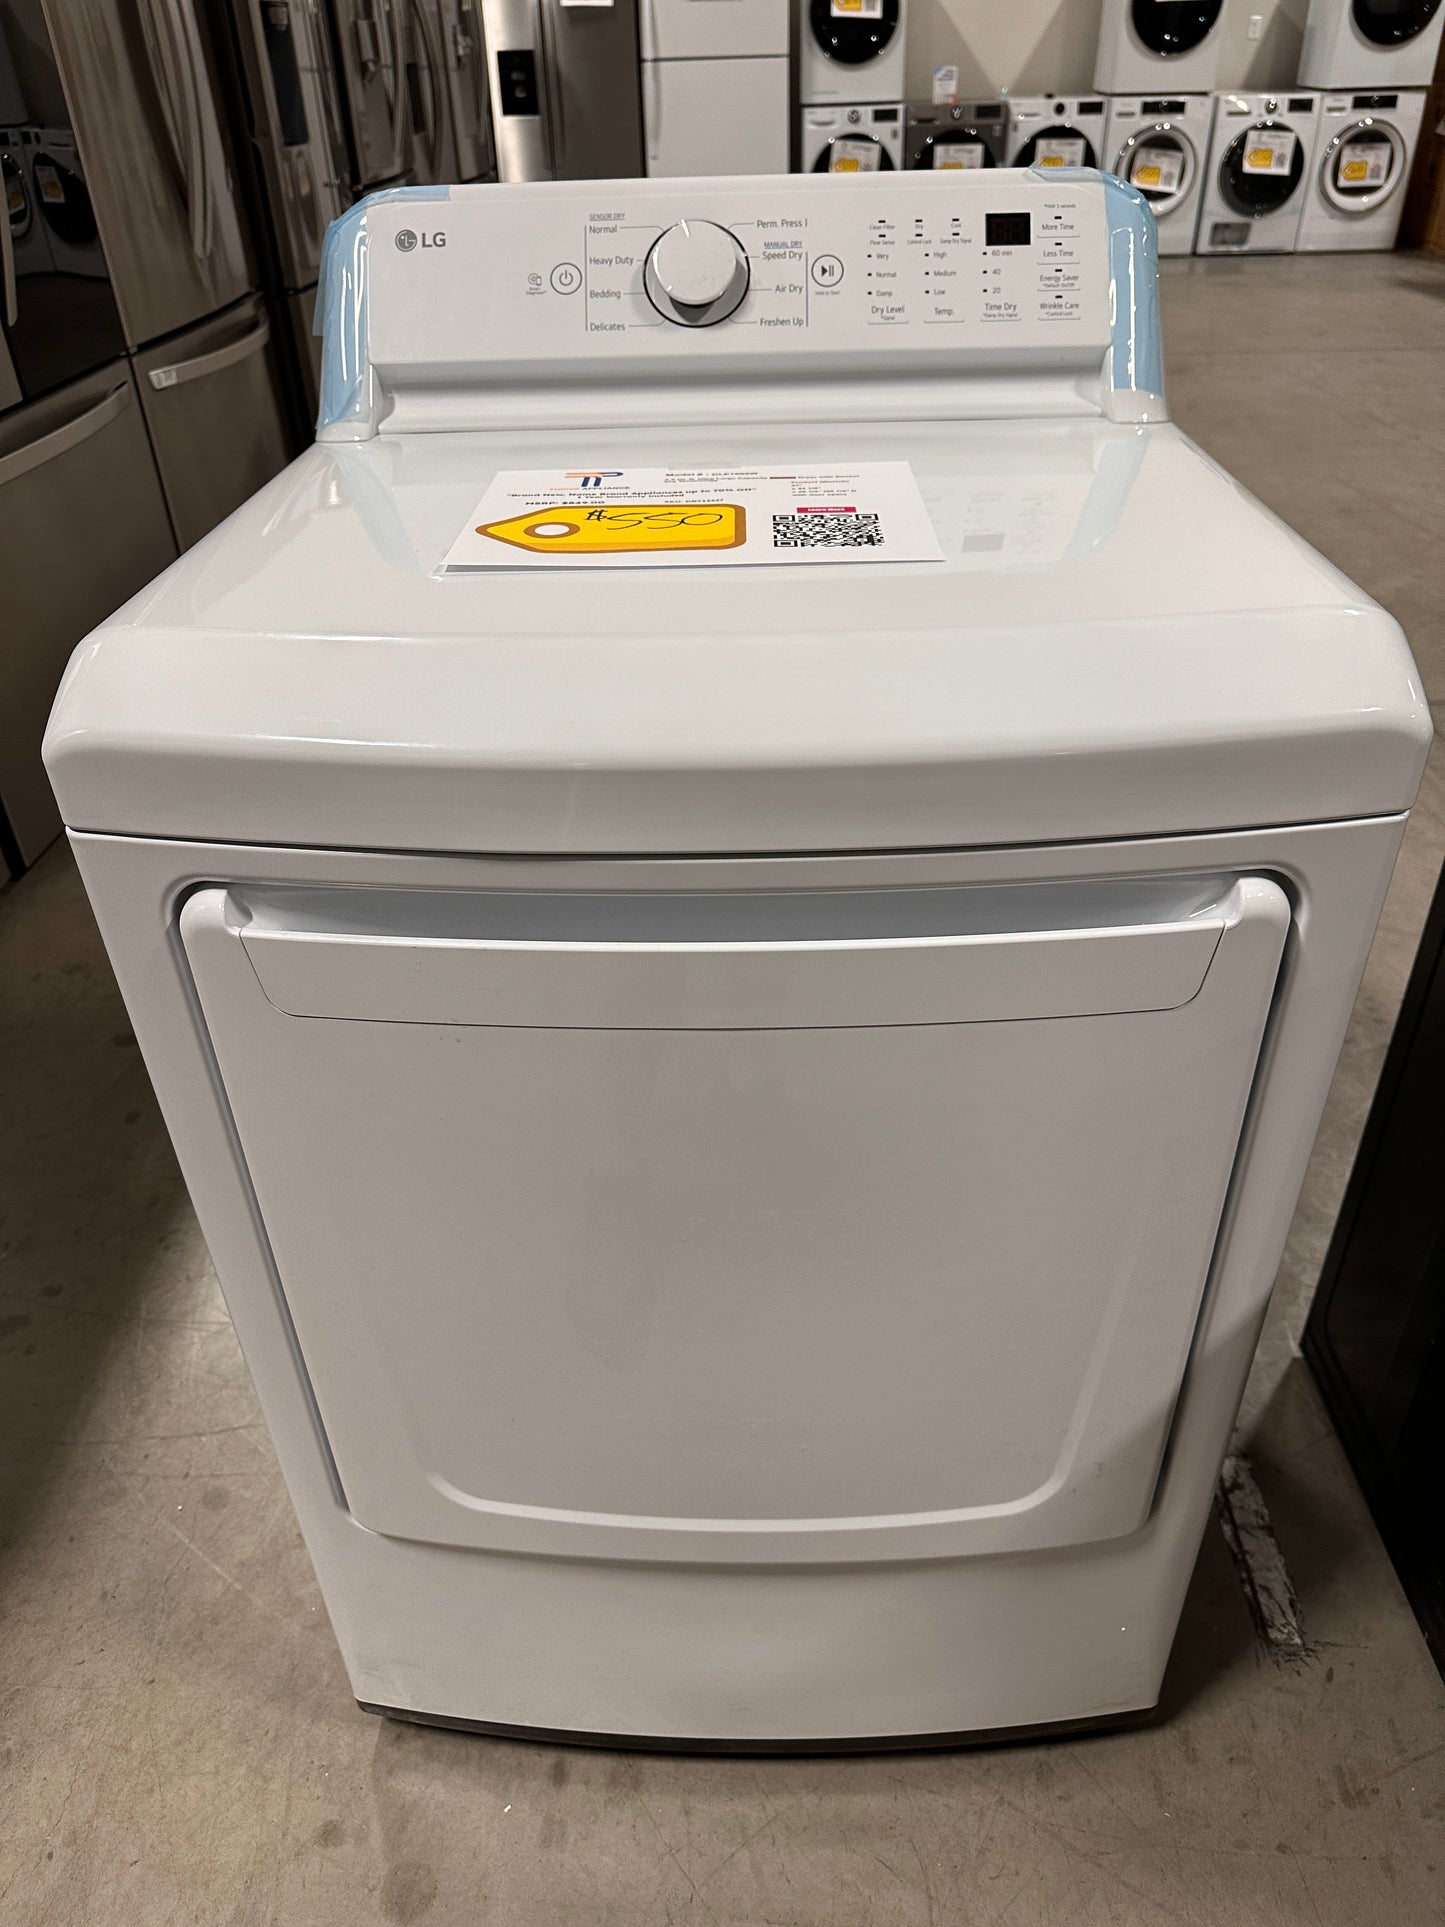 LG - 7.3 cu ft Electric Dryer with Sensor Dry - White  Model:DLE7000W  DRY12327